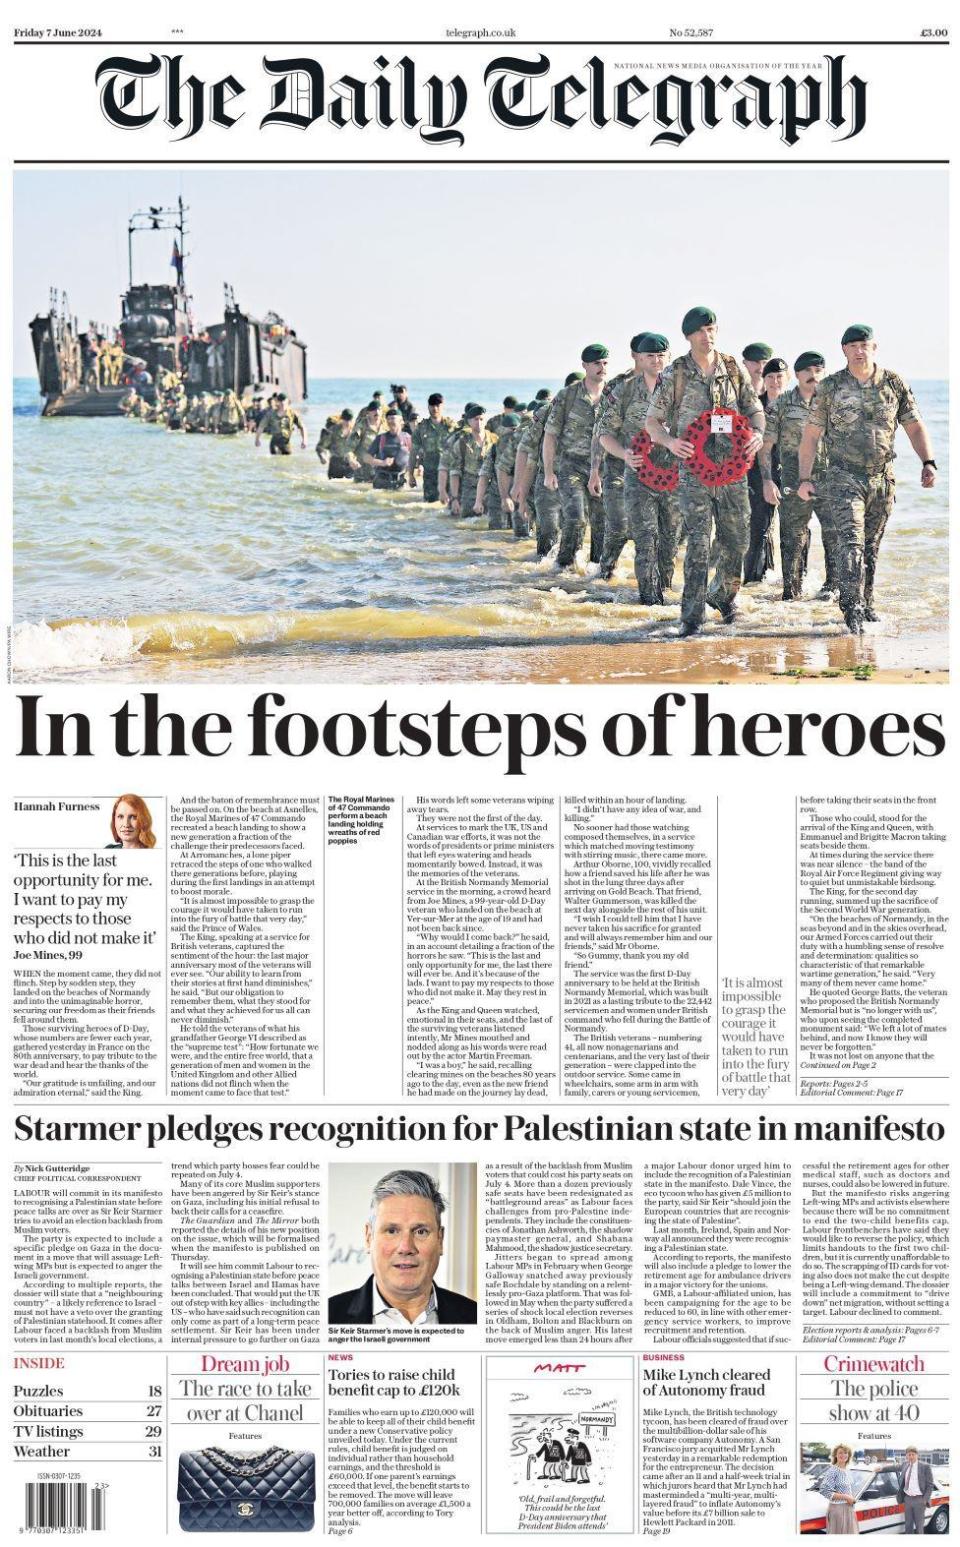 In the footsteps of heroes, reads the Daily Telegraph